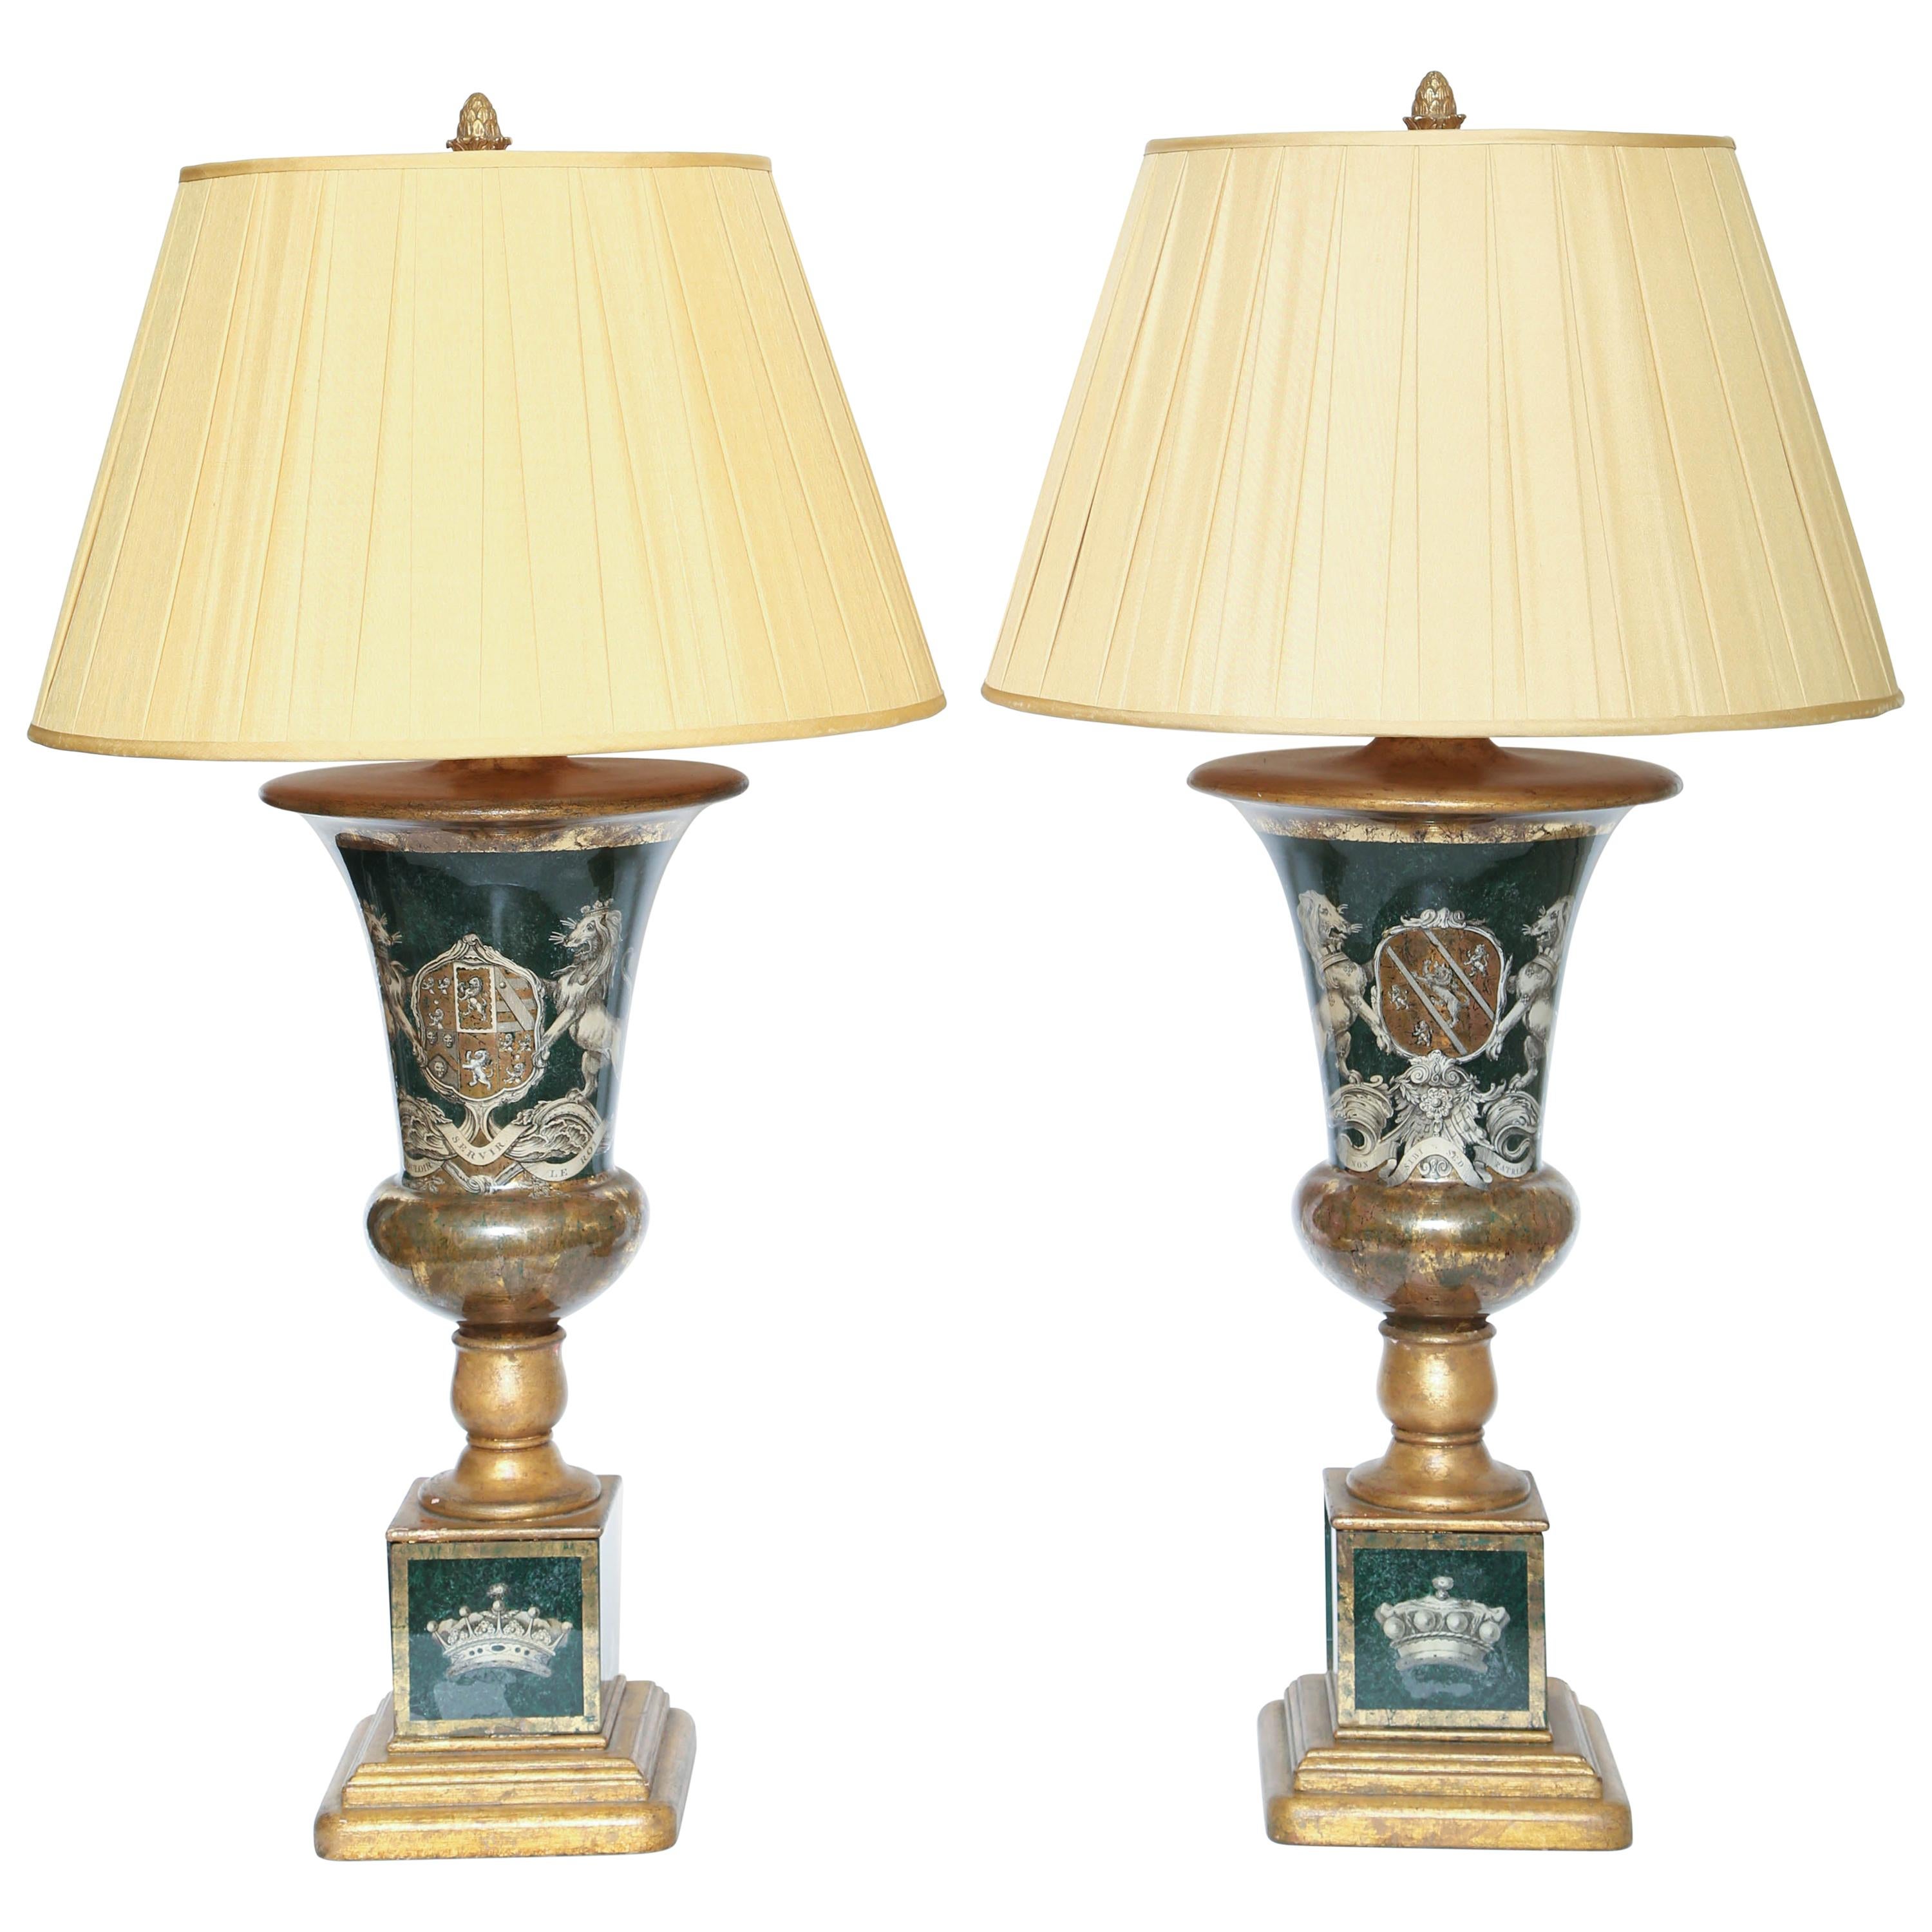 Stunning Pair of Vintage Decalcomania Armorial Lamps For Sale